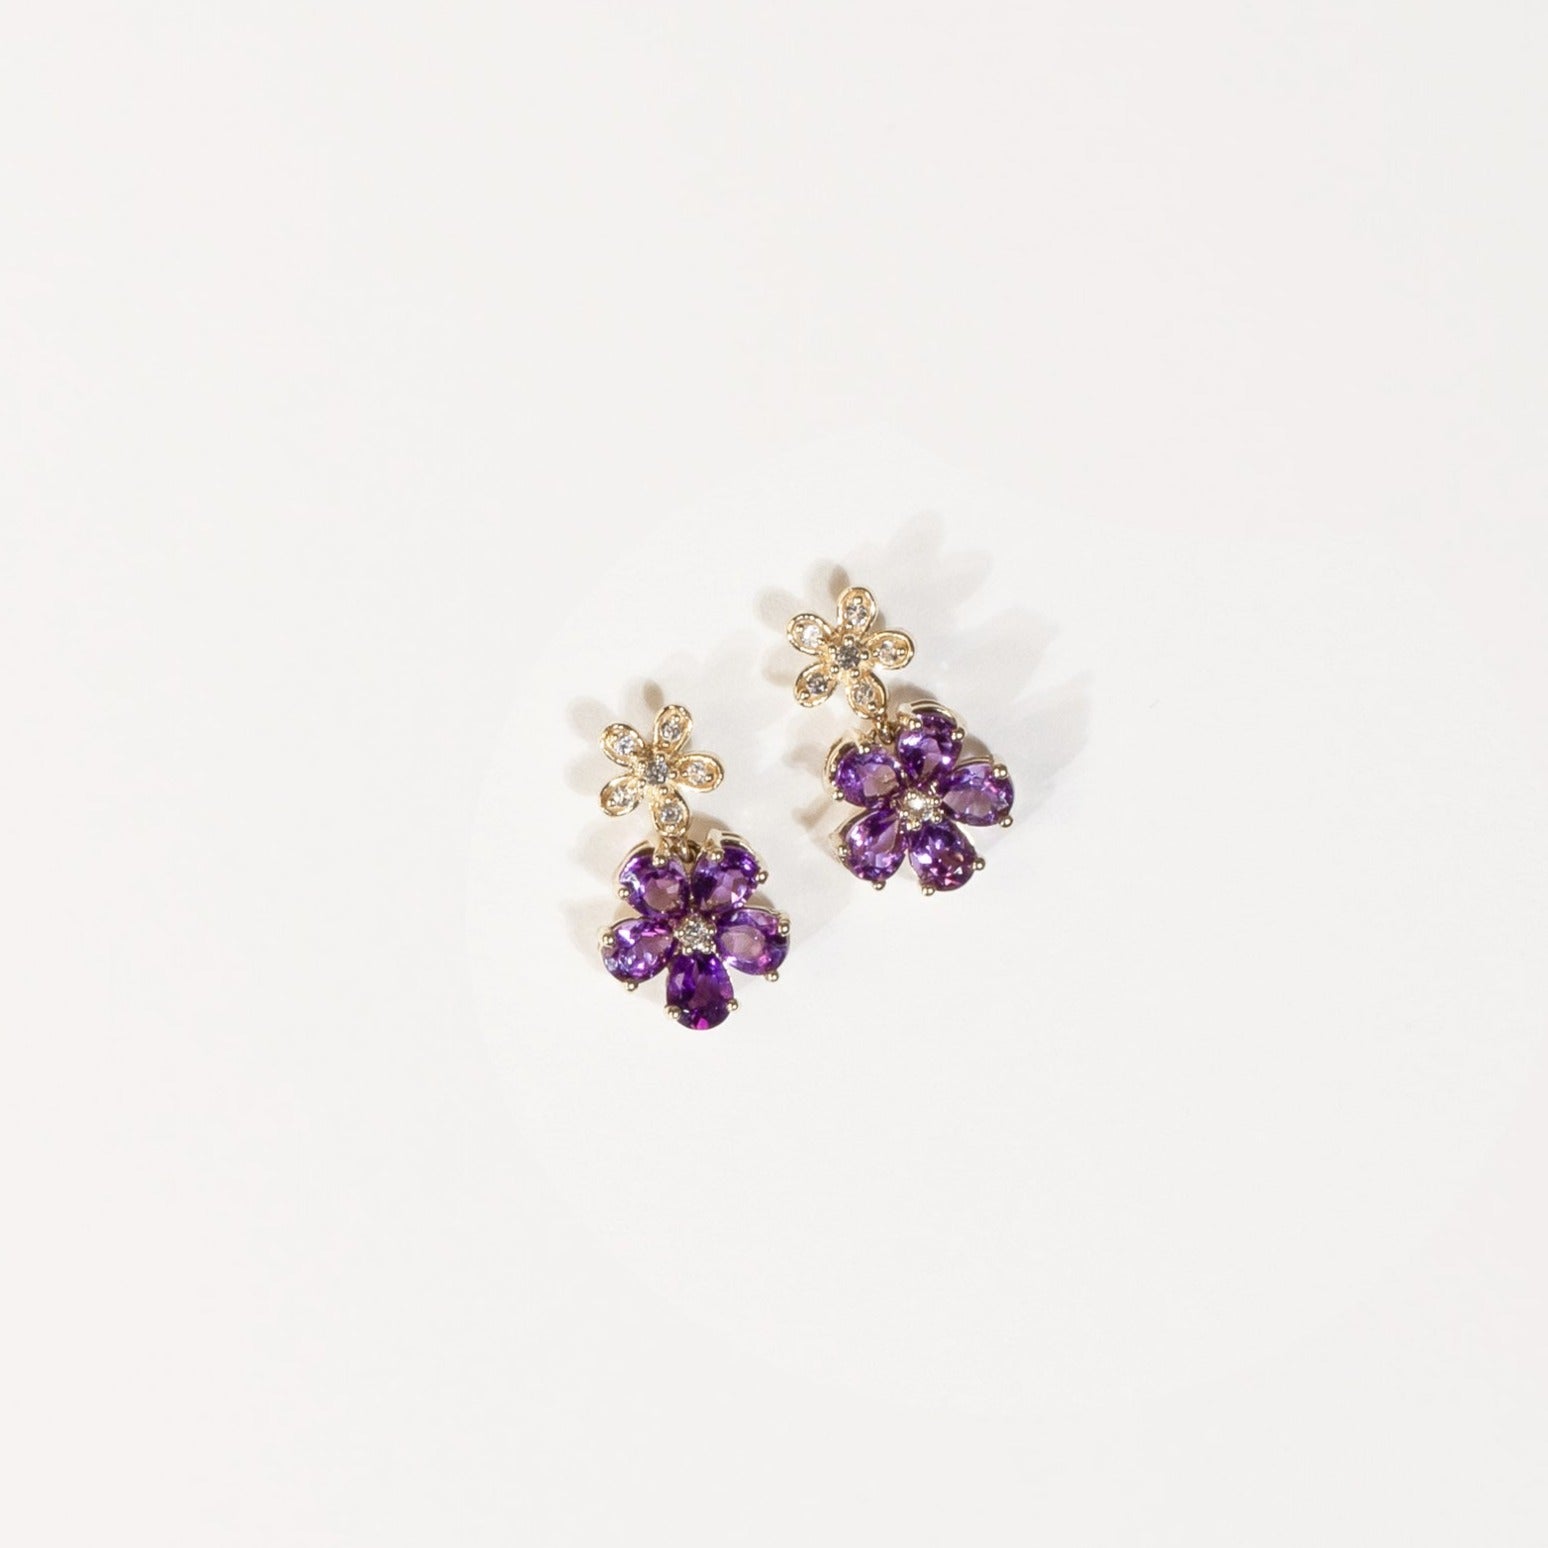 Double Flower Drop Stud Earrings in Amethyst and White Sapphire Earrings Estella Collection #product_description# 32670 10k Amethyst Birthstone #tag4# #tag5# #tag6# #tag7# #tag8# #tag9# #tag10#